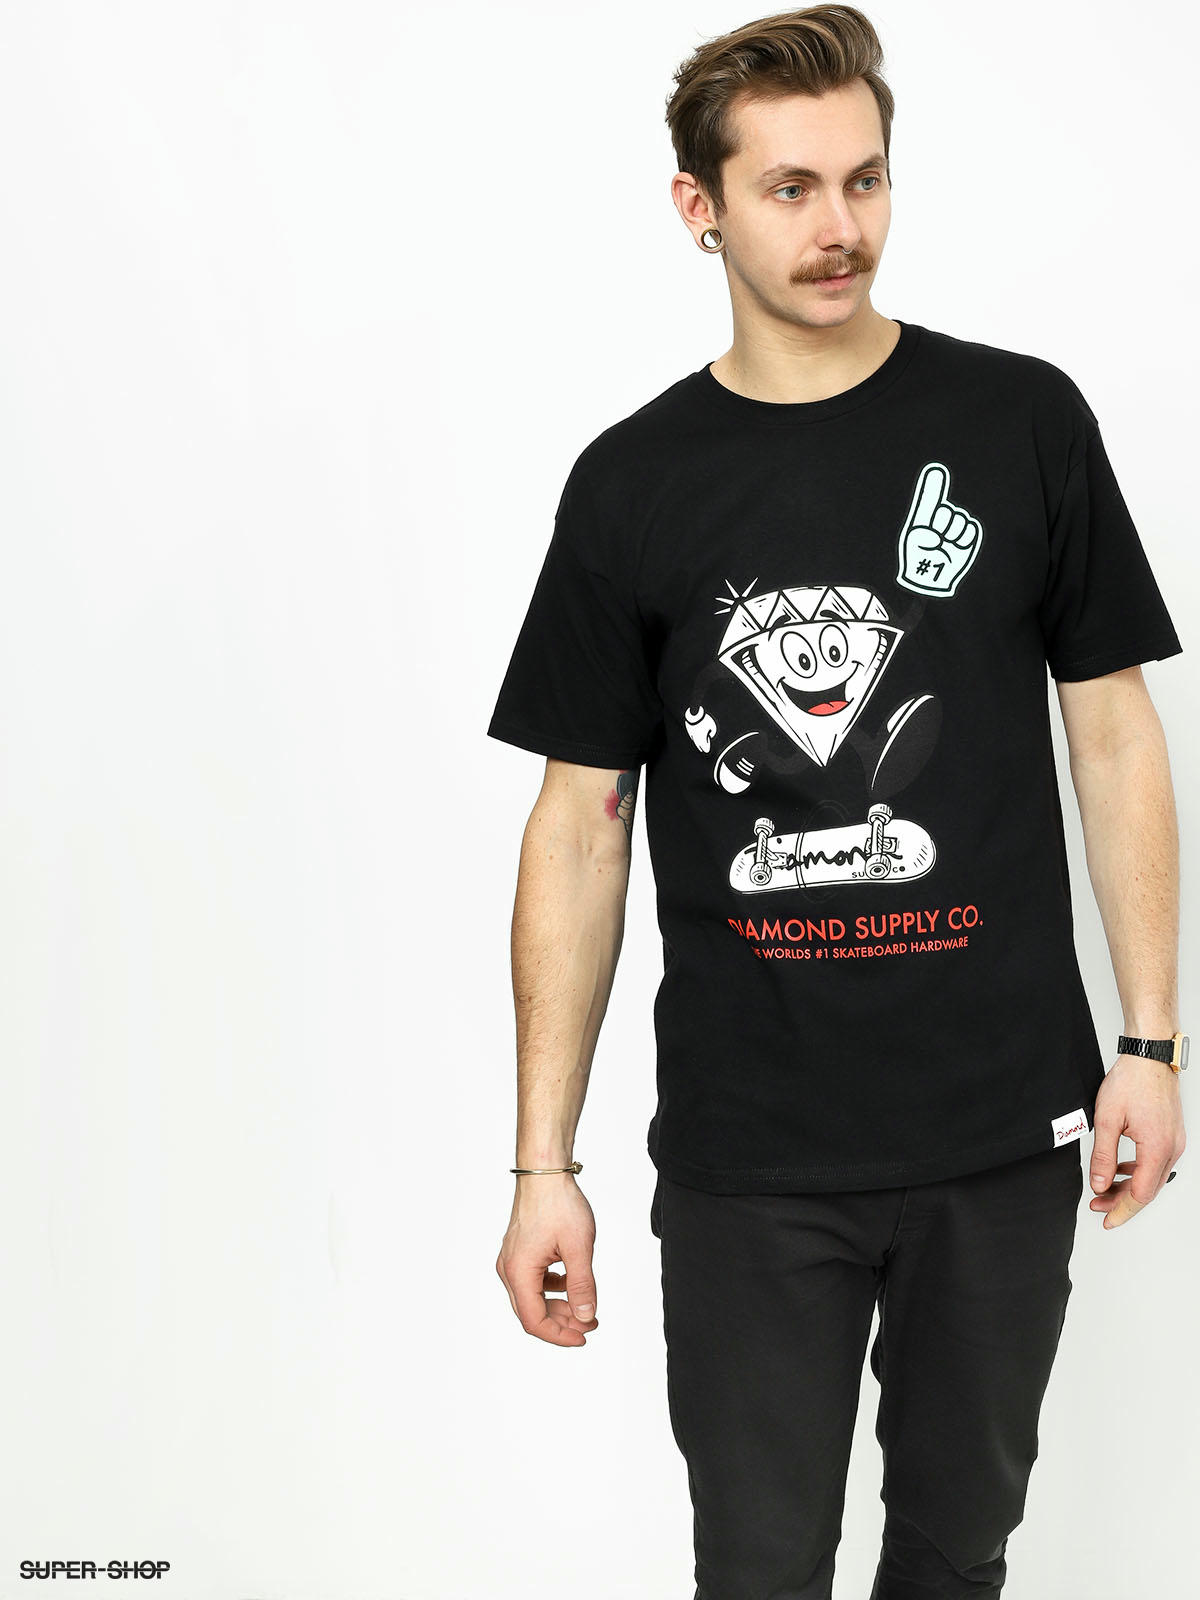 cheapest place to buy diamond supply co